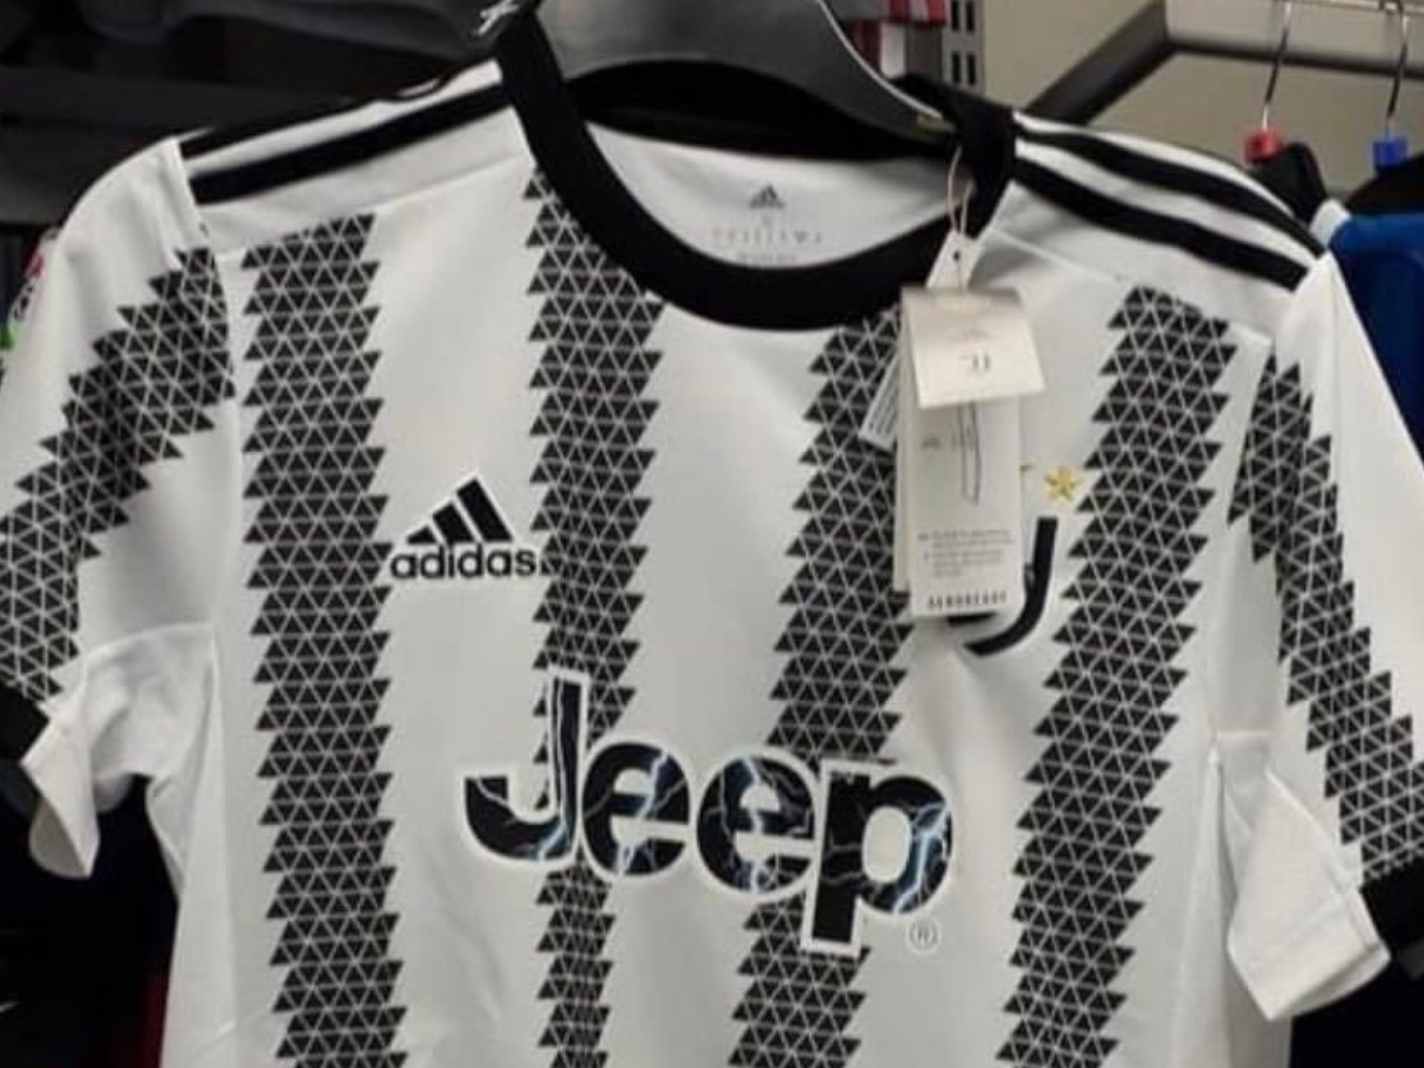 Like TV Static: Twitter reacts to leaked Juventus home kit for 22/23 season